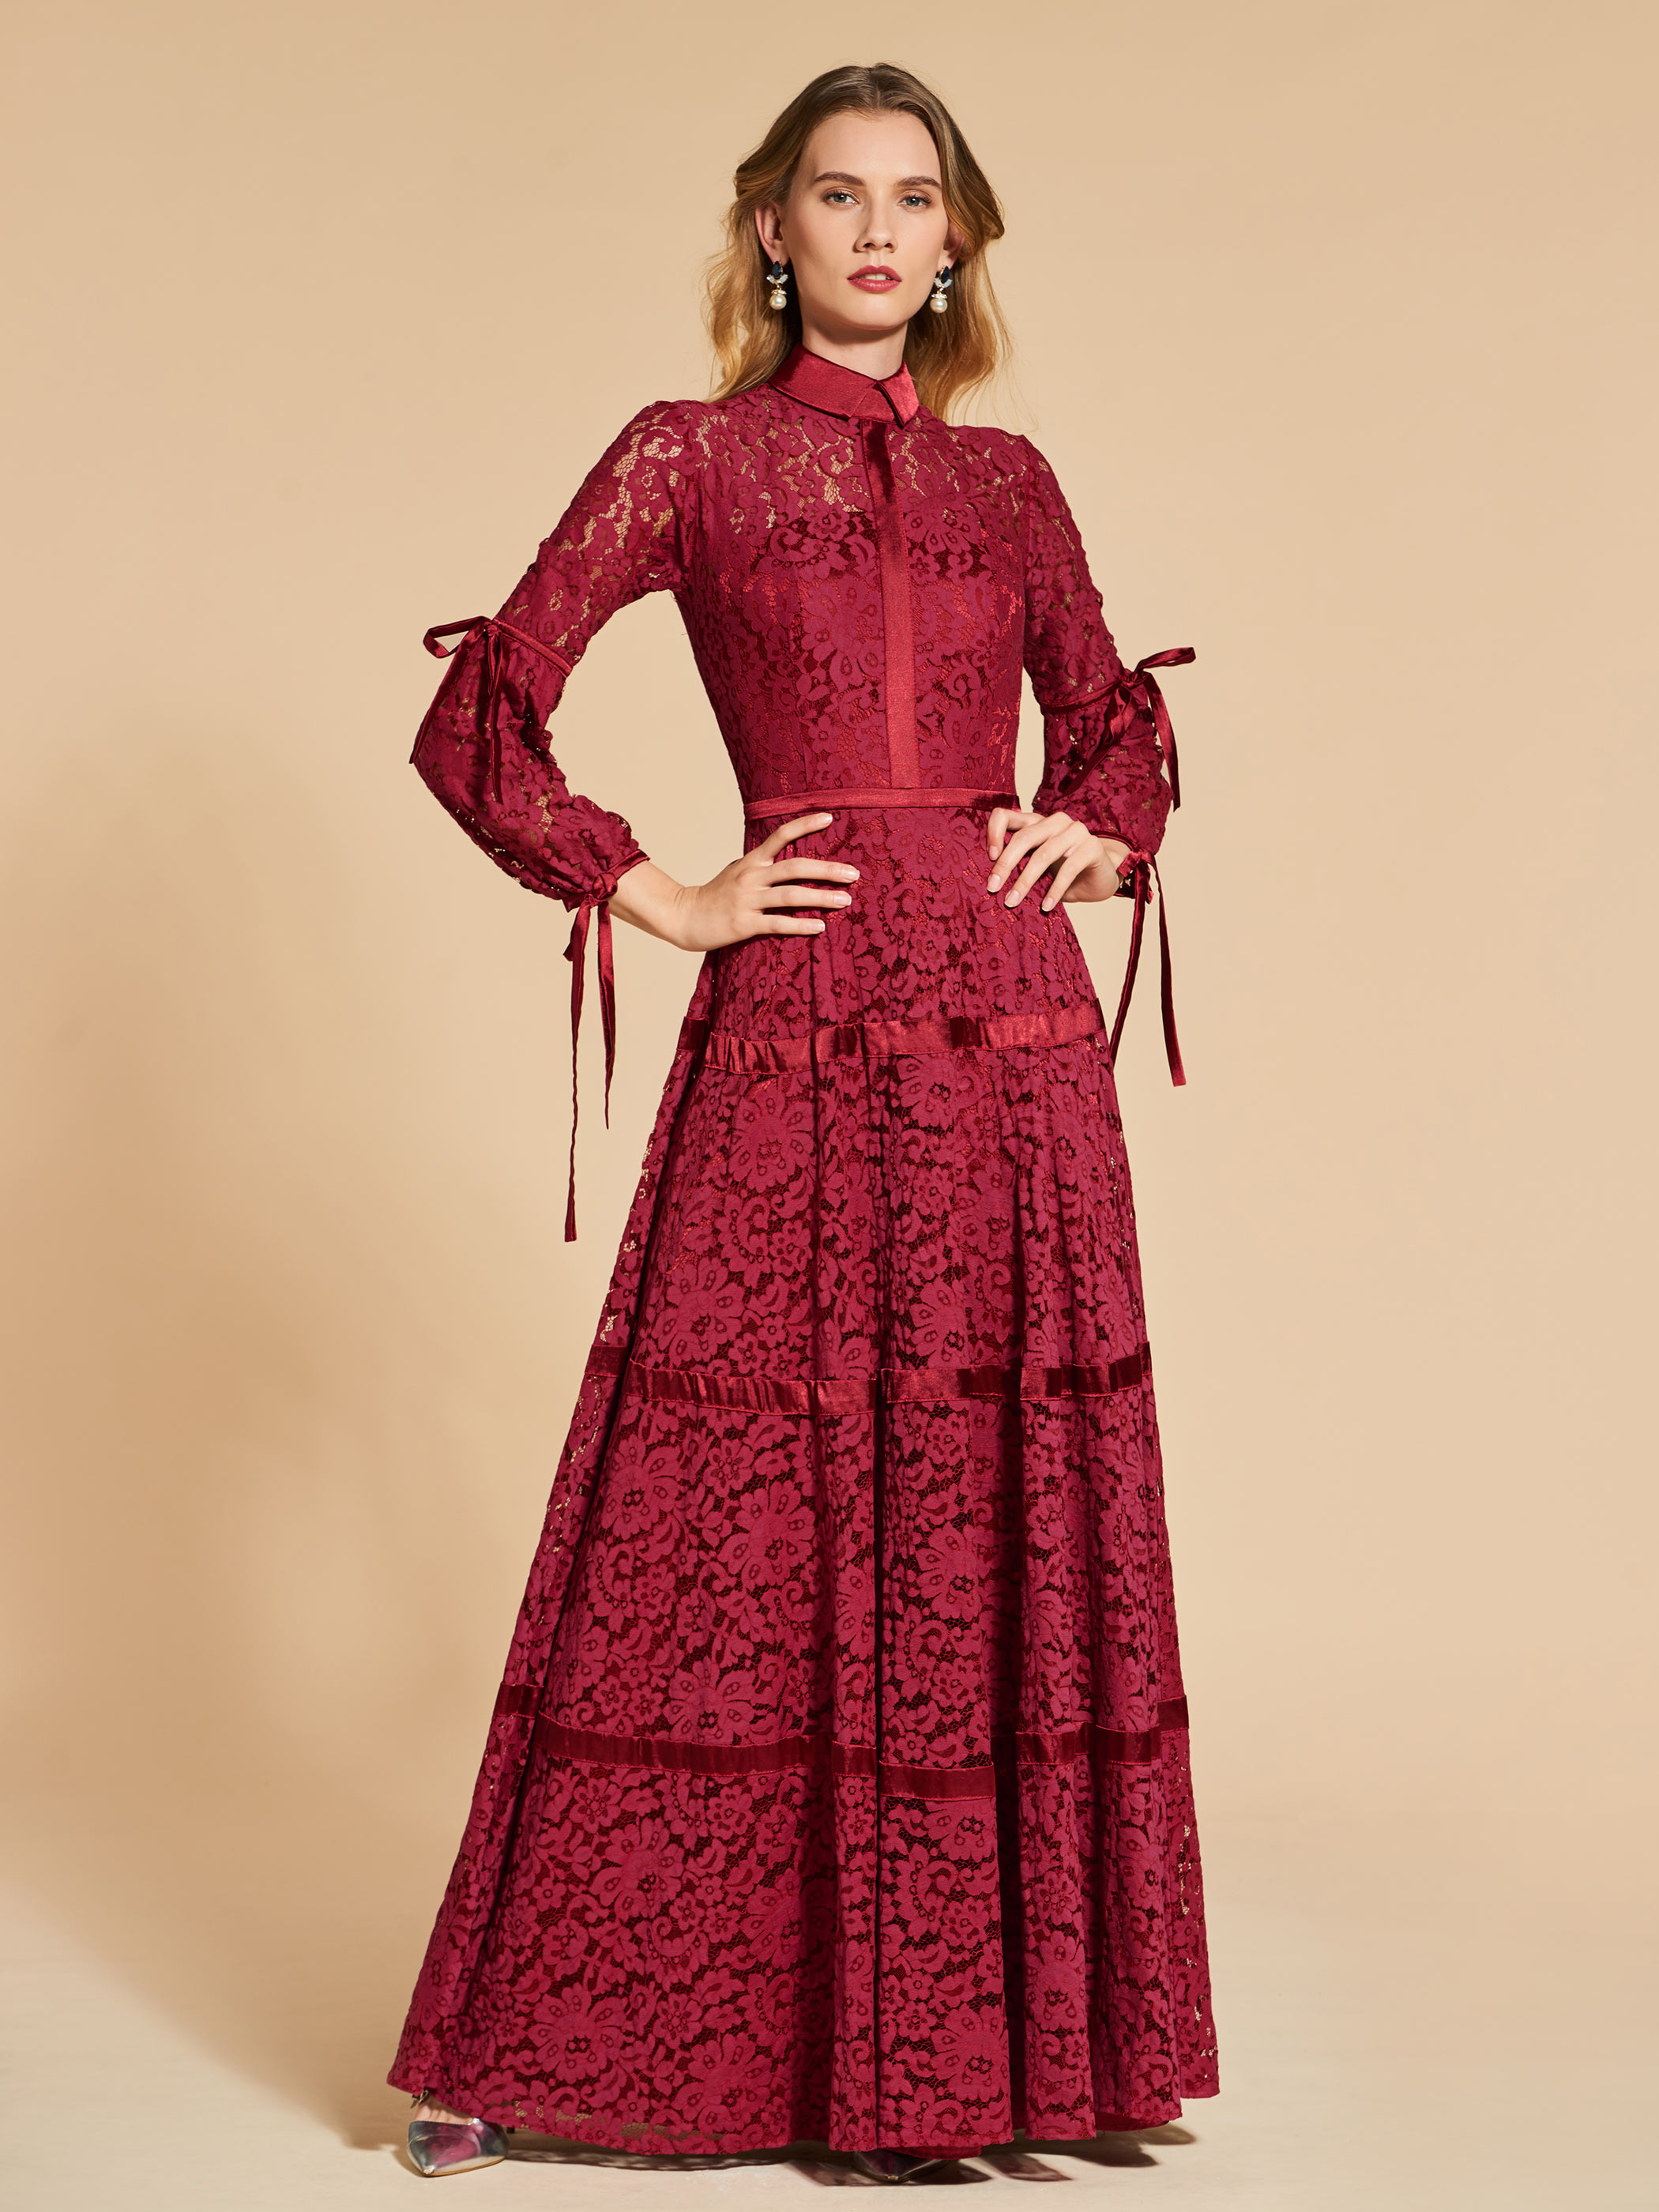 Ericdress Long Sleeves High Neck Vintage Lace Evening Dress